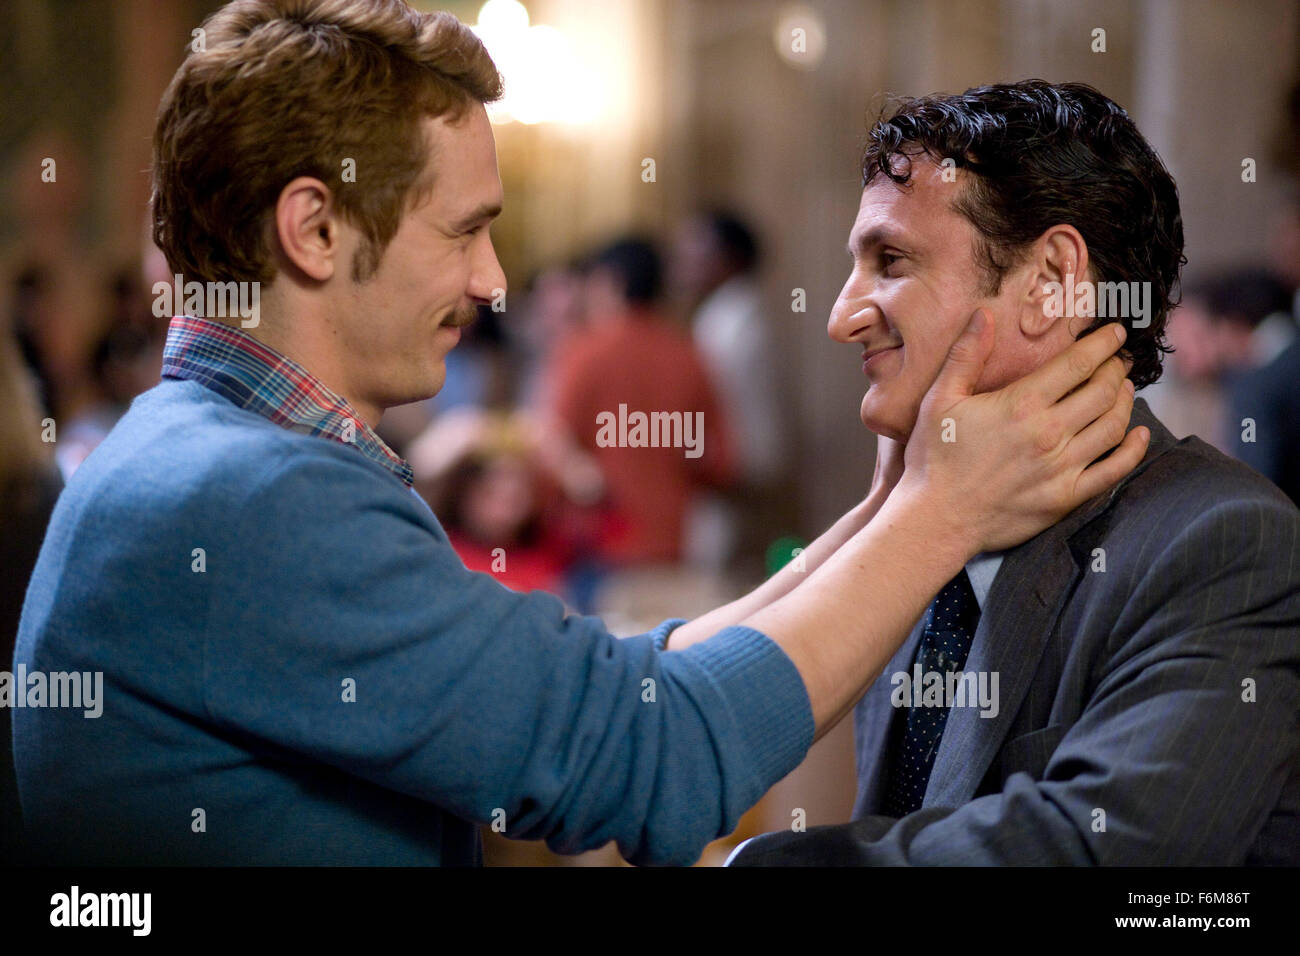 RELEASE DATE: December 5, 2008. MOVIE TITLE: Milk aka Untitled Harvey Milk Project. STUDIO: Focus Features. PLOT: The story of California's first openly gay elected official, Harvey Milk, a San Francisco supervisor who was assassinated along with Mayor George Moscone by San Francisco Supervisor Dan White. PICTURED: JAMES FRANCO as gay rights activist Scott Smith and SEAN PENN as Harvey Milk. Stock Photo